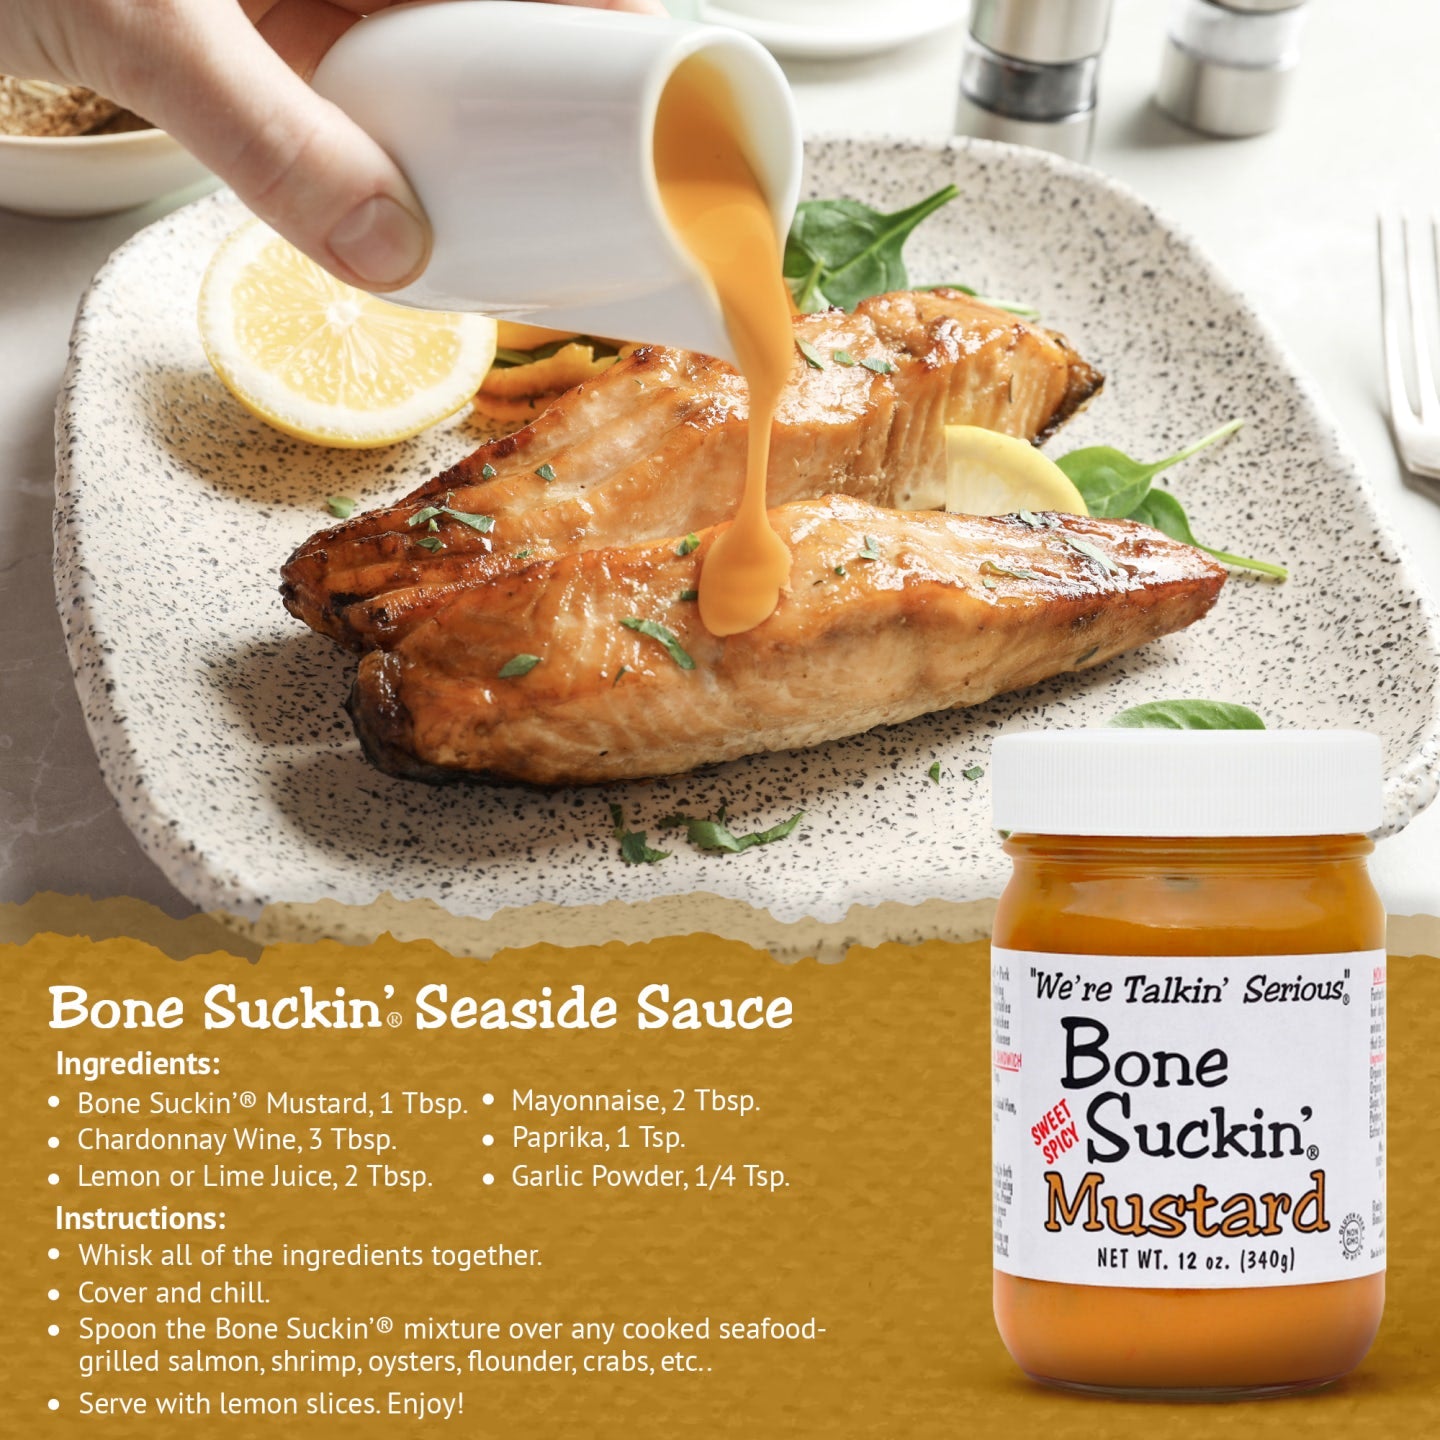 Bone Suckin Seaside Sauce Recipes. Ingredients: Bone Suckin Mustard, 1 tbsp. Chardonnay Wine, 3 tbsp. Lemon or Lime Juice, 2 tbsp. Mayonnaise, 2 tbsp. Paprika, 1 tsp. Garlic Powder, 1/4 tsp. Instructions: Whisk all of the ingredients together. Cover and chill. Spoon the Bone Suckin mixture over any cooked seafood-grilled salmon, shrimp, oysters, flounder, crabs, etc. Serve with lemon slices. Enjoy!